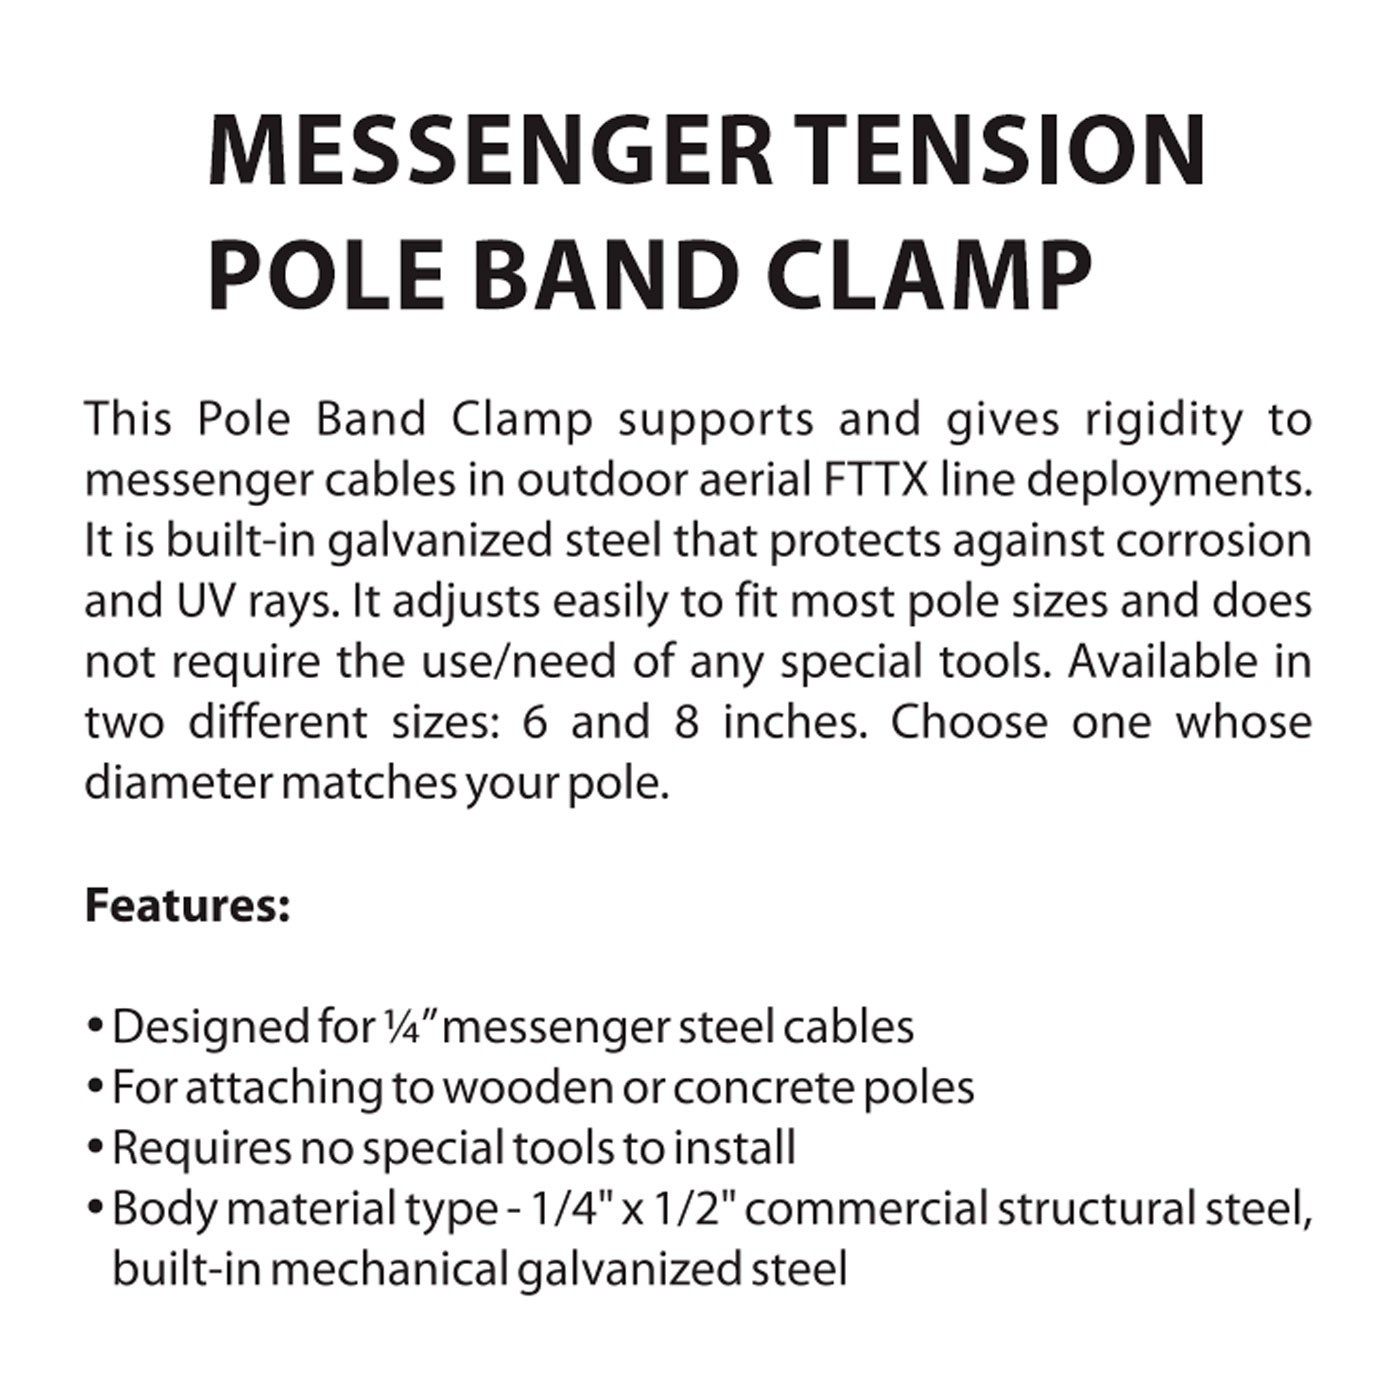 MESSENGER TENSION POLE BAND CLAMP